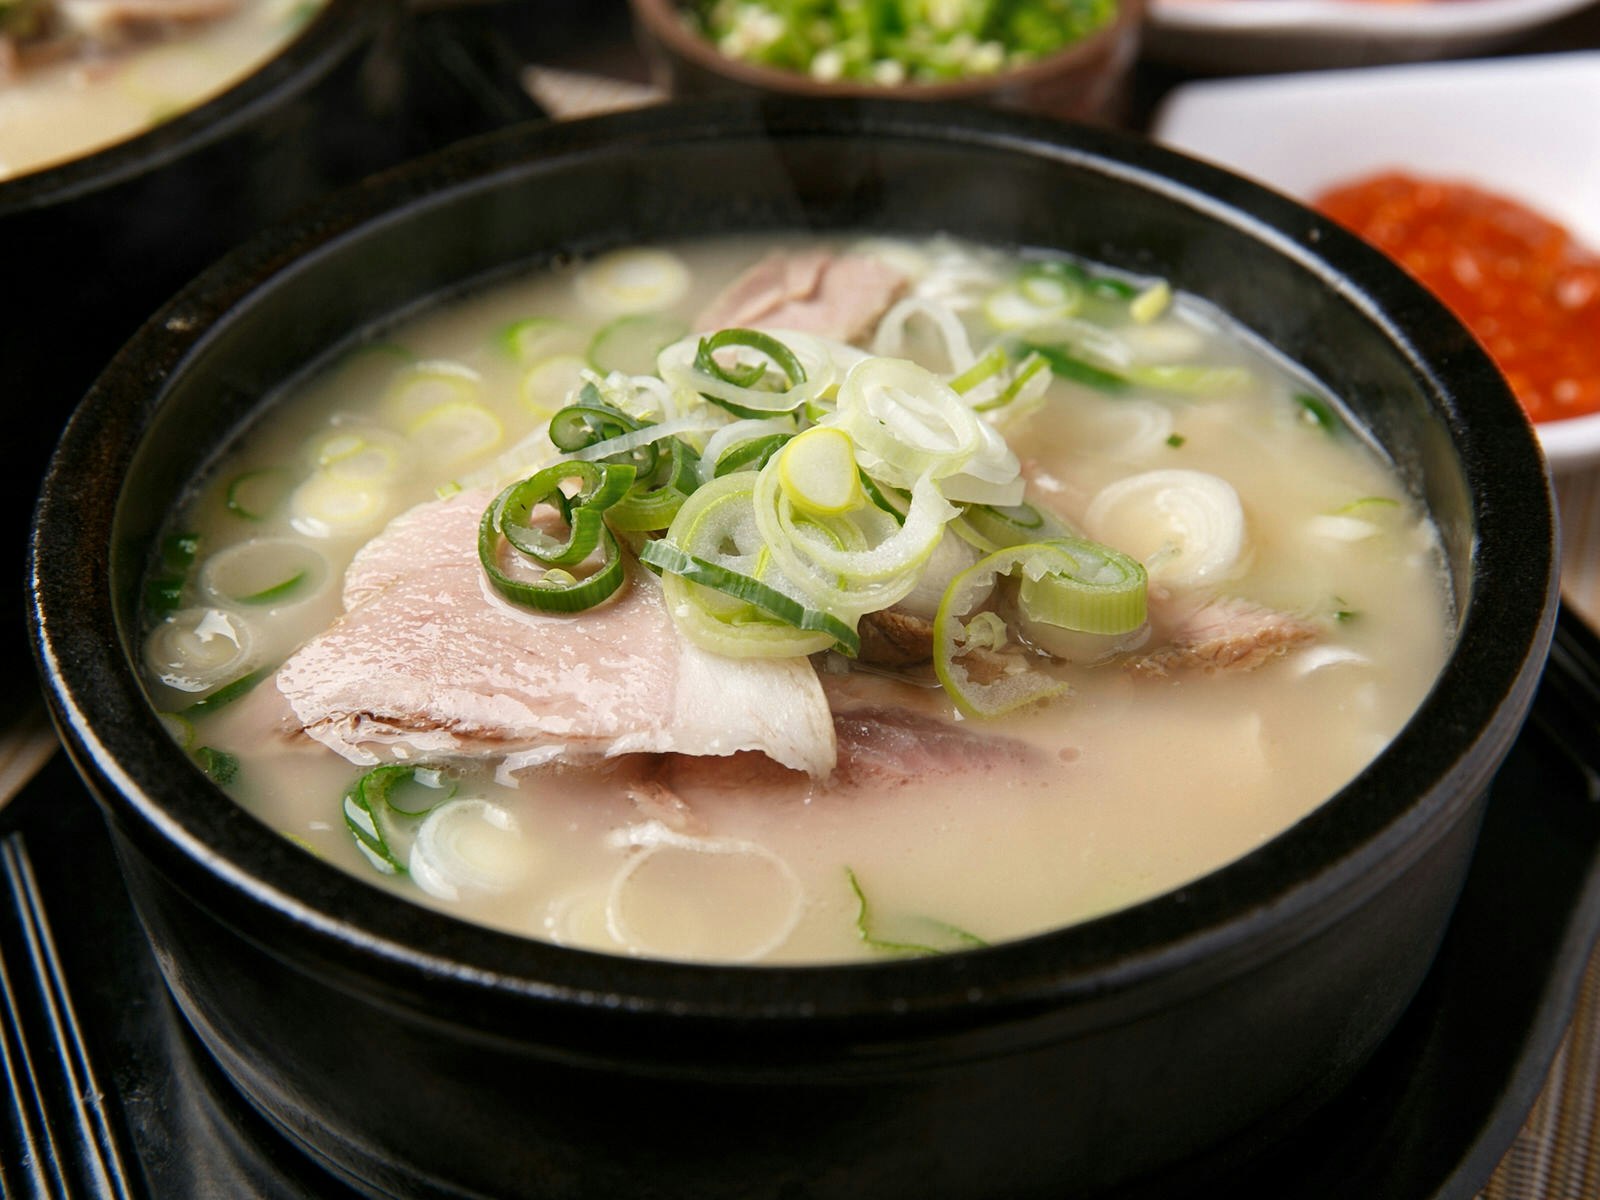 A black bowl of broth with pork slices and green onions on top. Busan's signature dish is dwaeji gukbap, a milky pork broth stew © TMON / Shutterstock